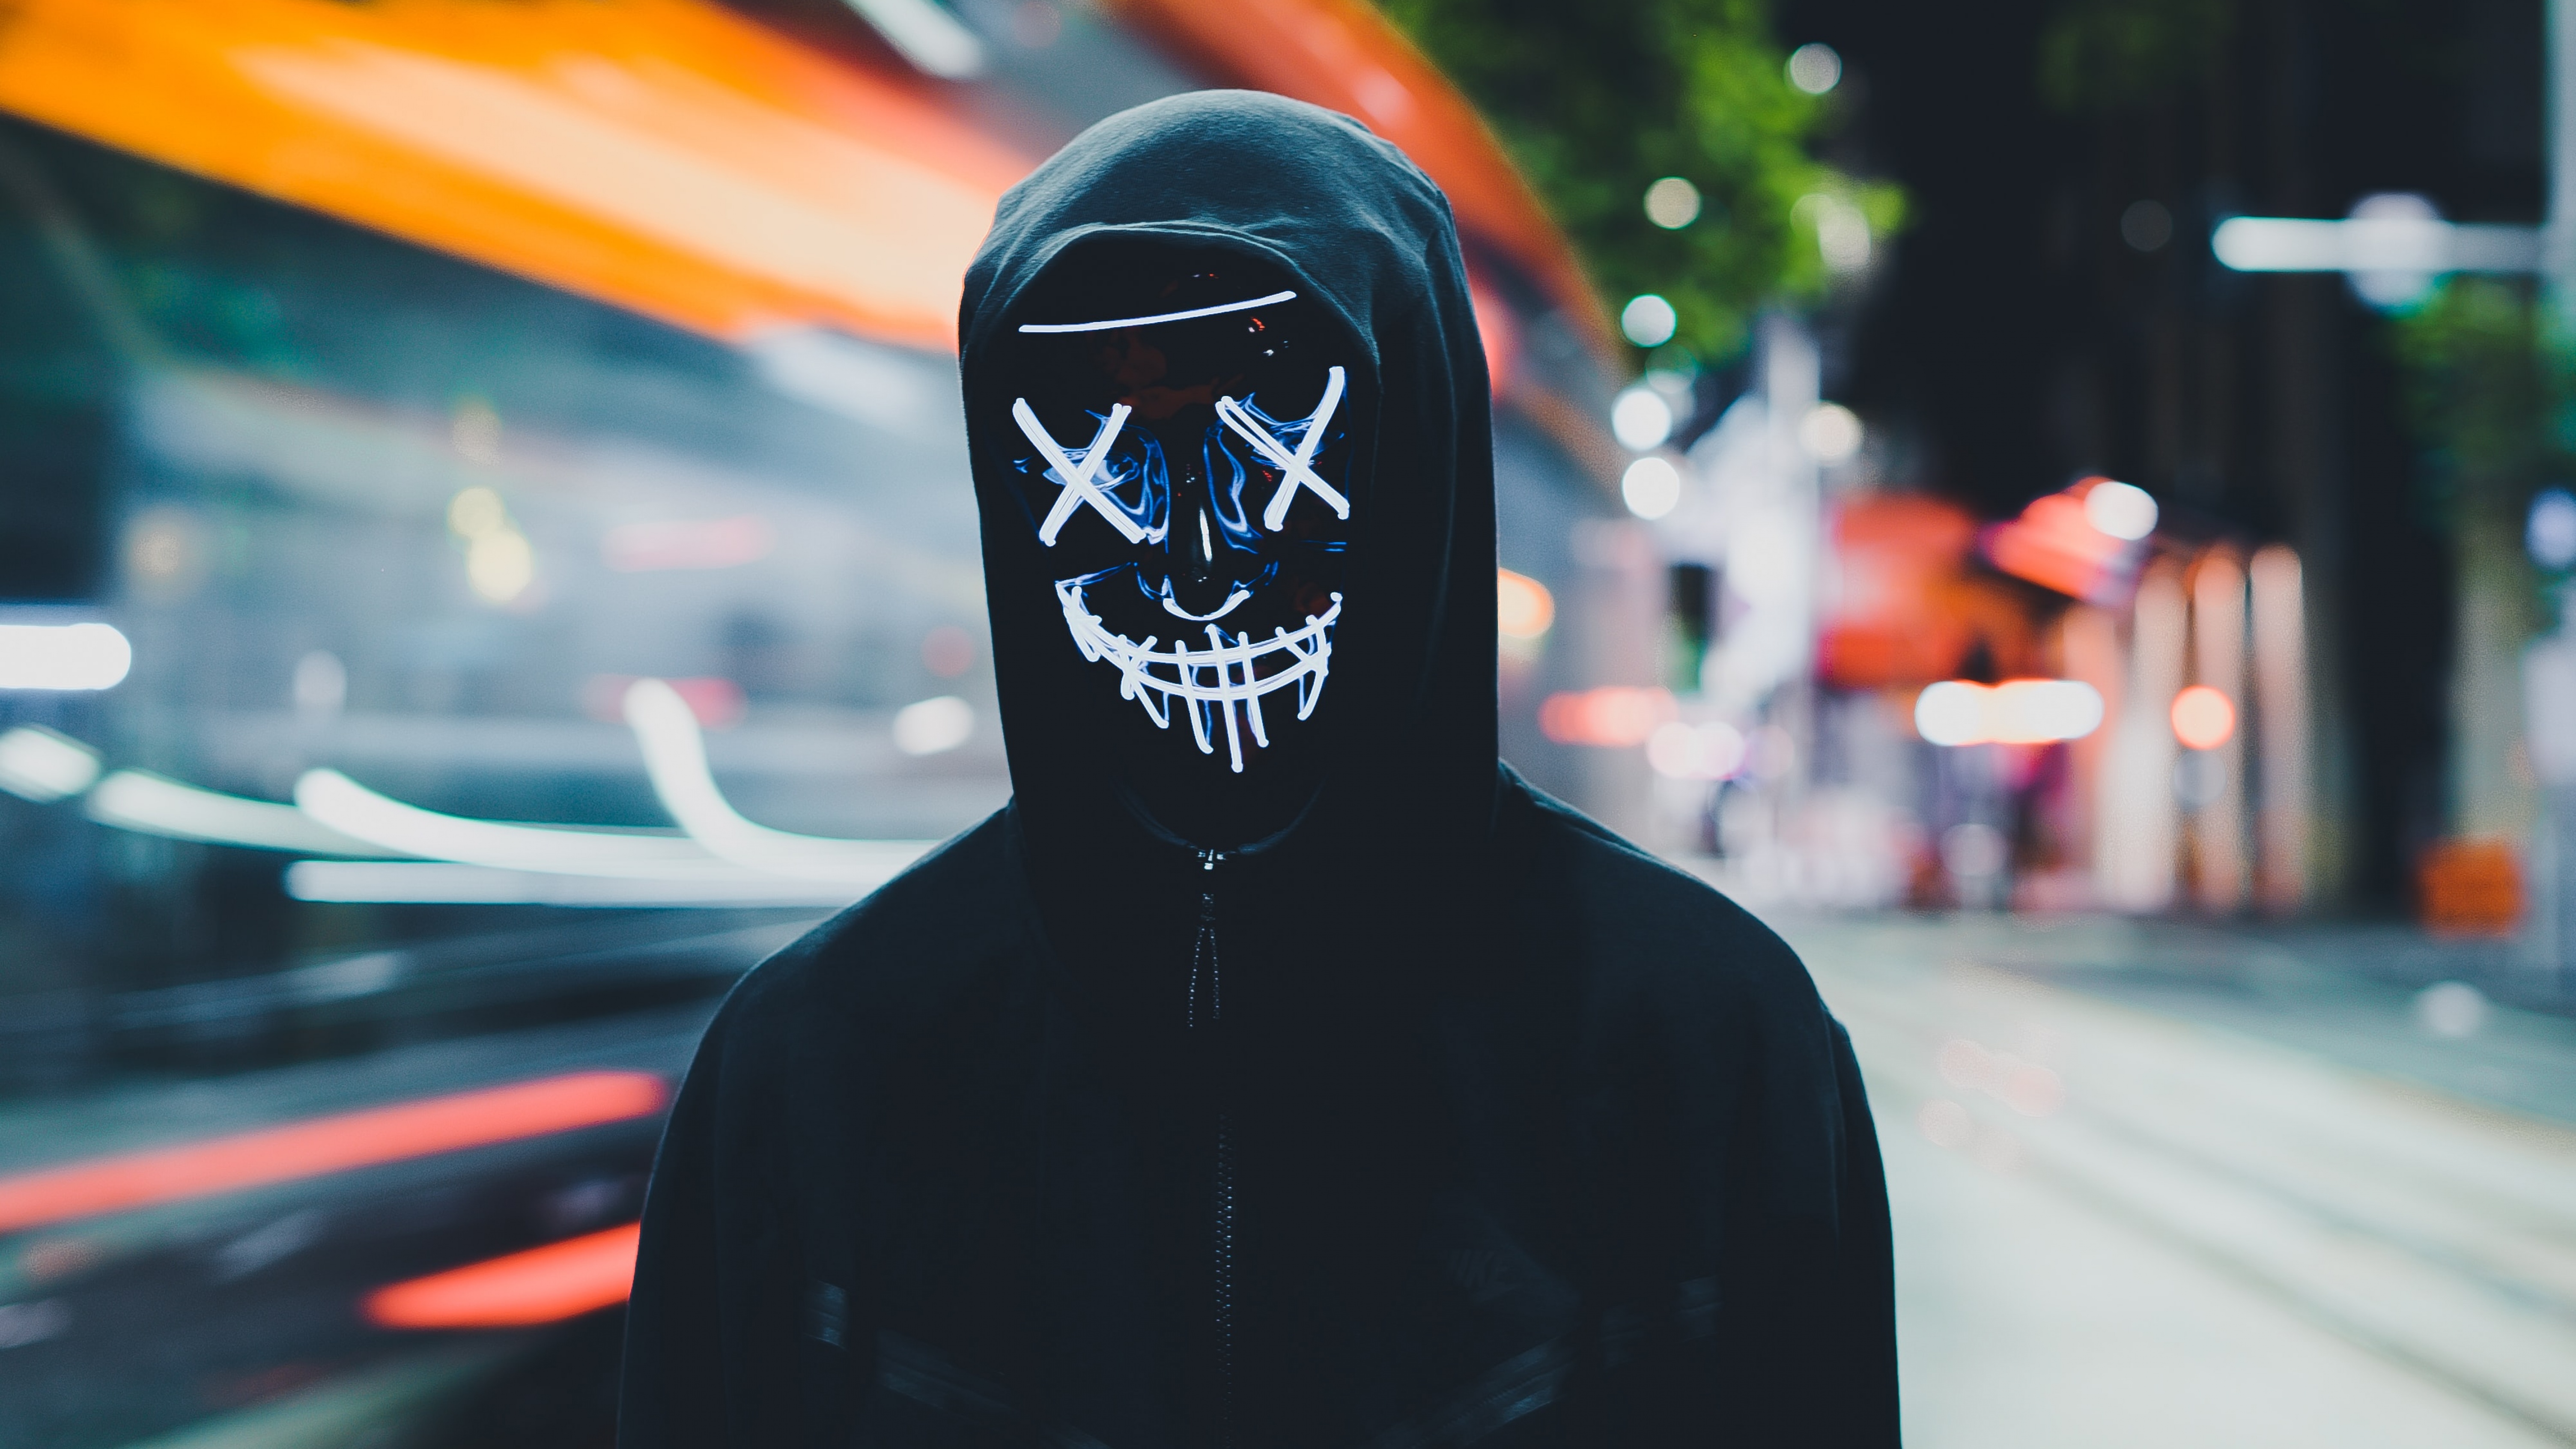 Persons in Mask Wallpaper 4K, Neon Mask, Black Hoodie, Photography, #4598